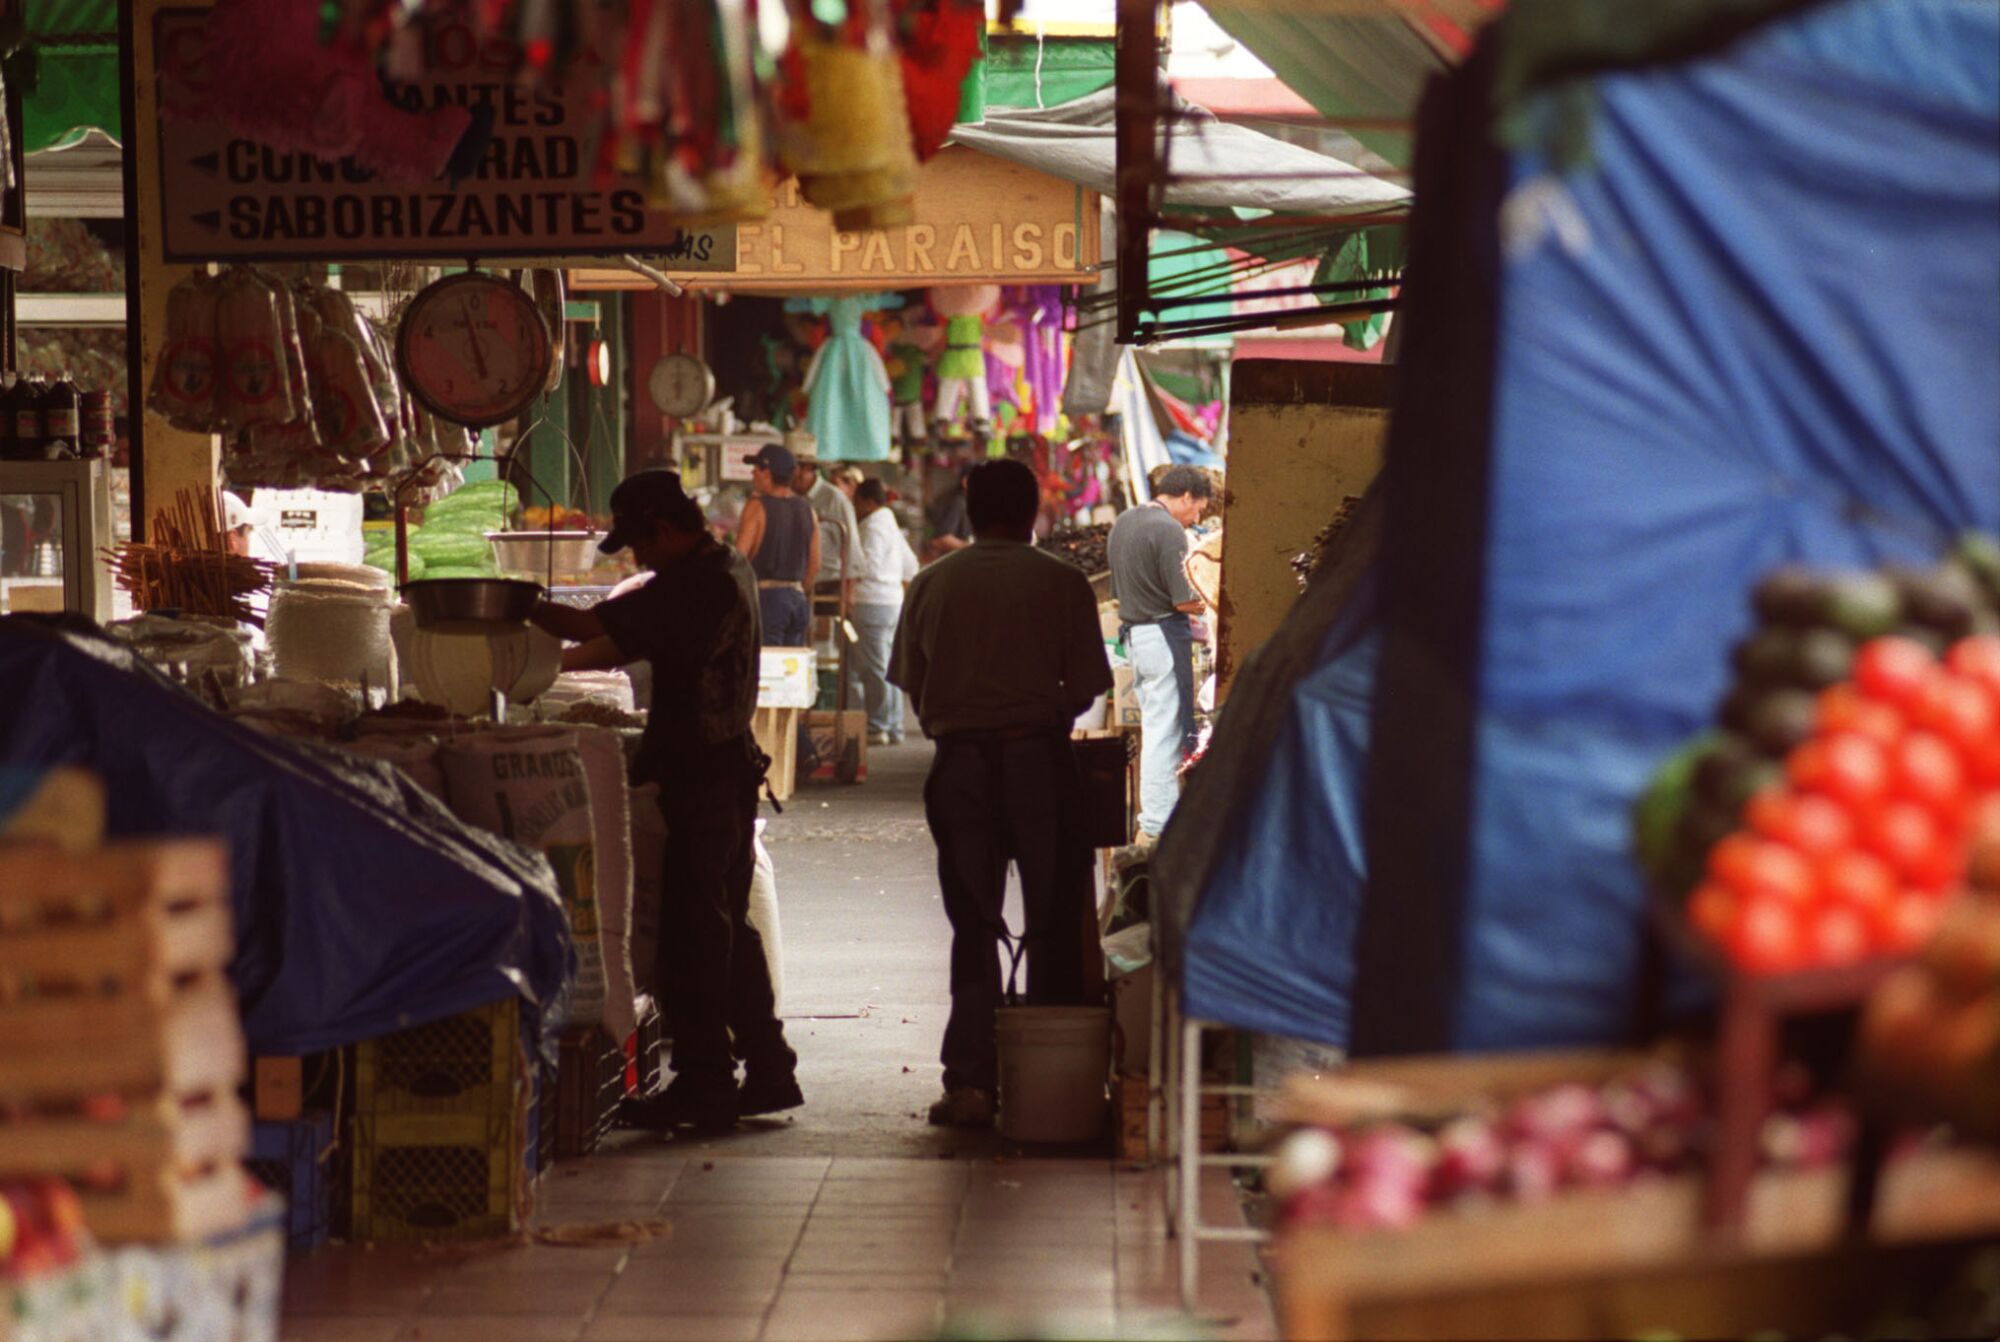 Workers prepare for the day at Tijuana's Mercado Hidalgo in August 2000.